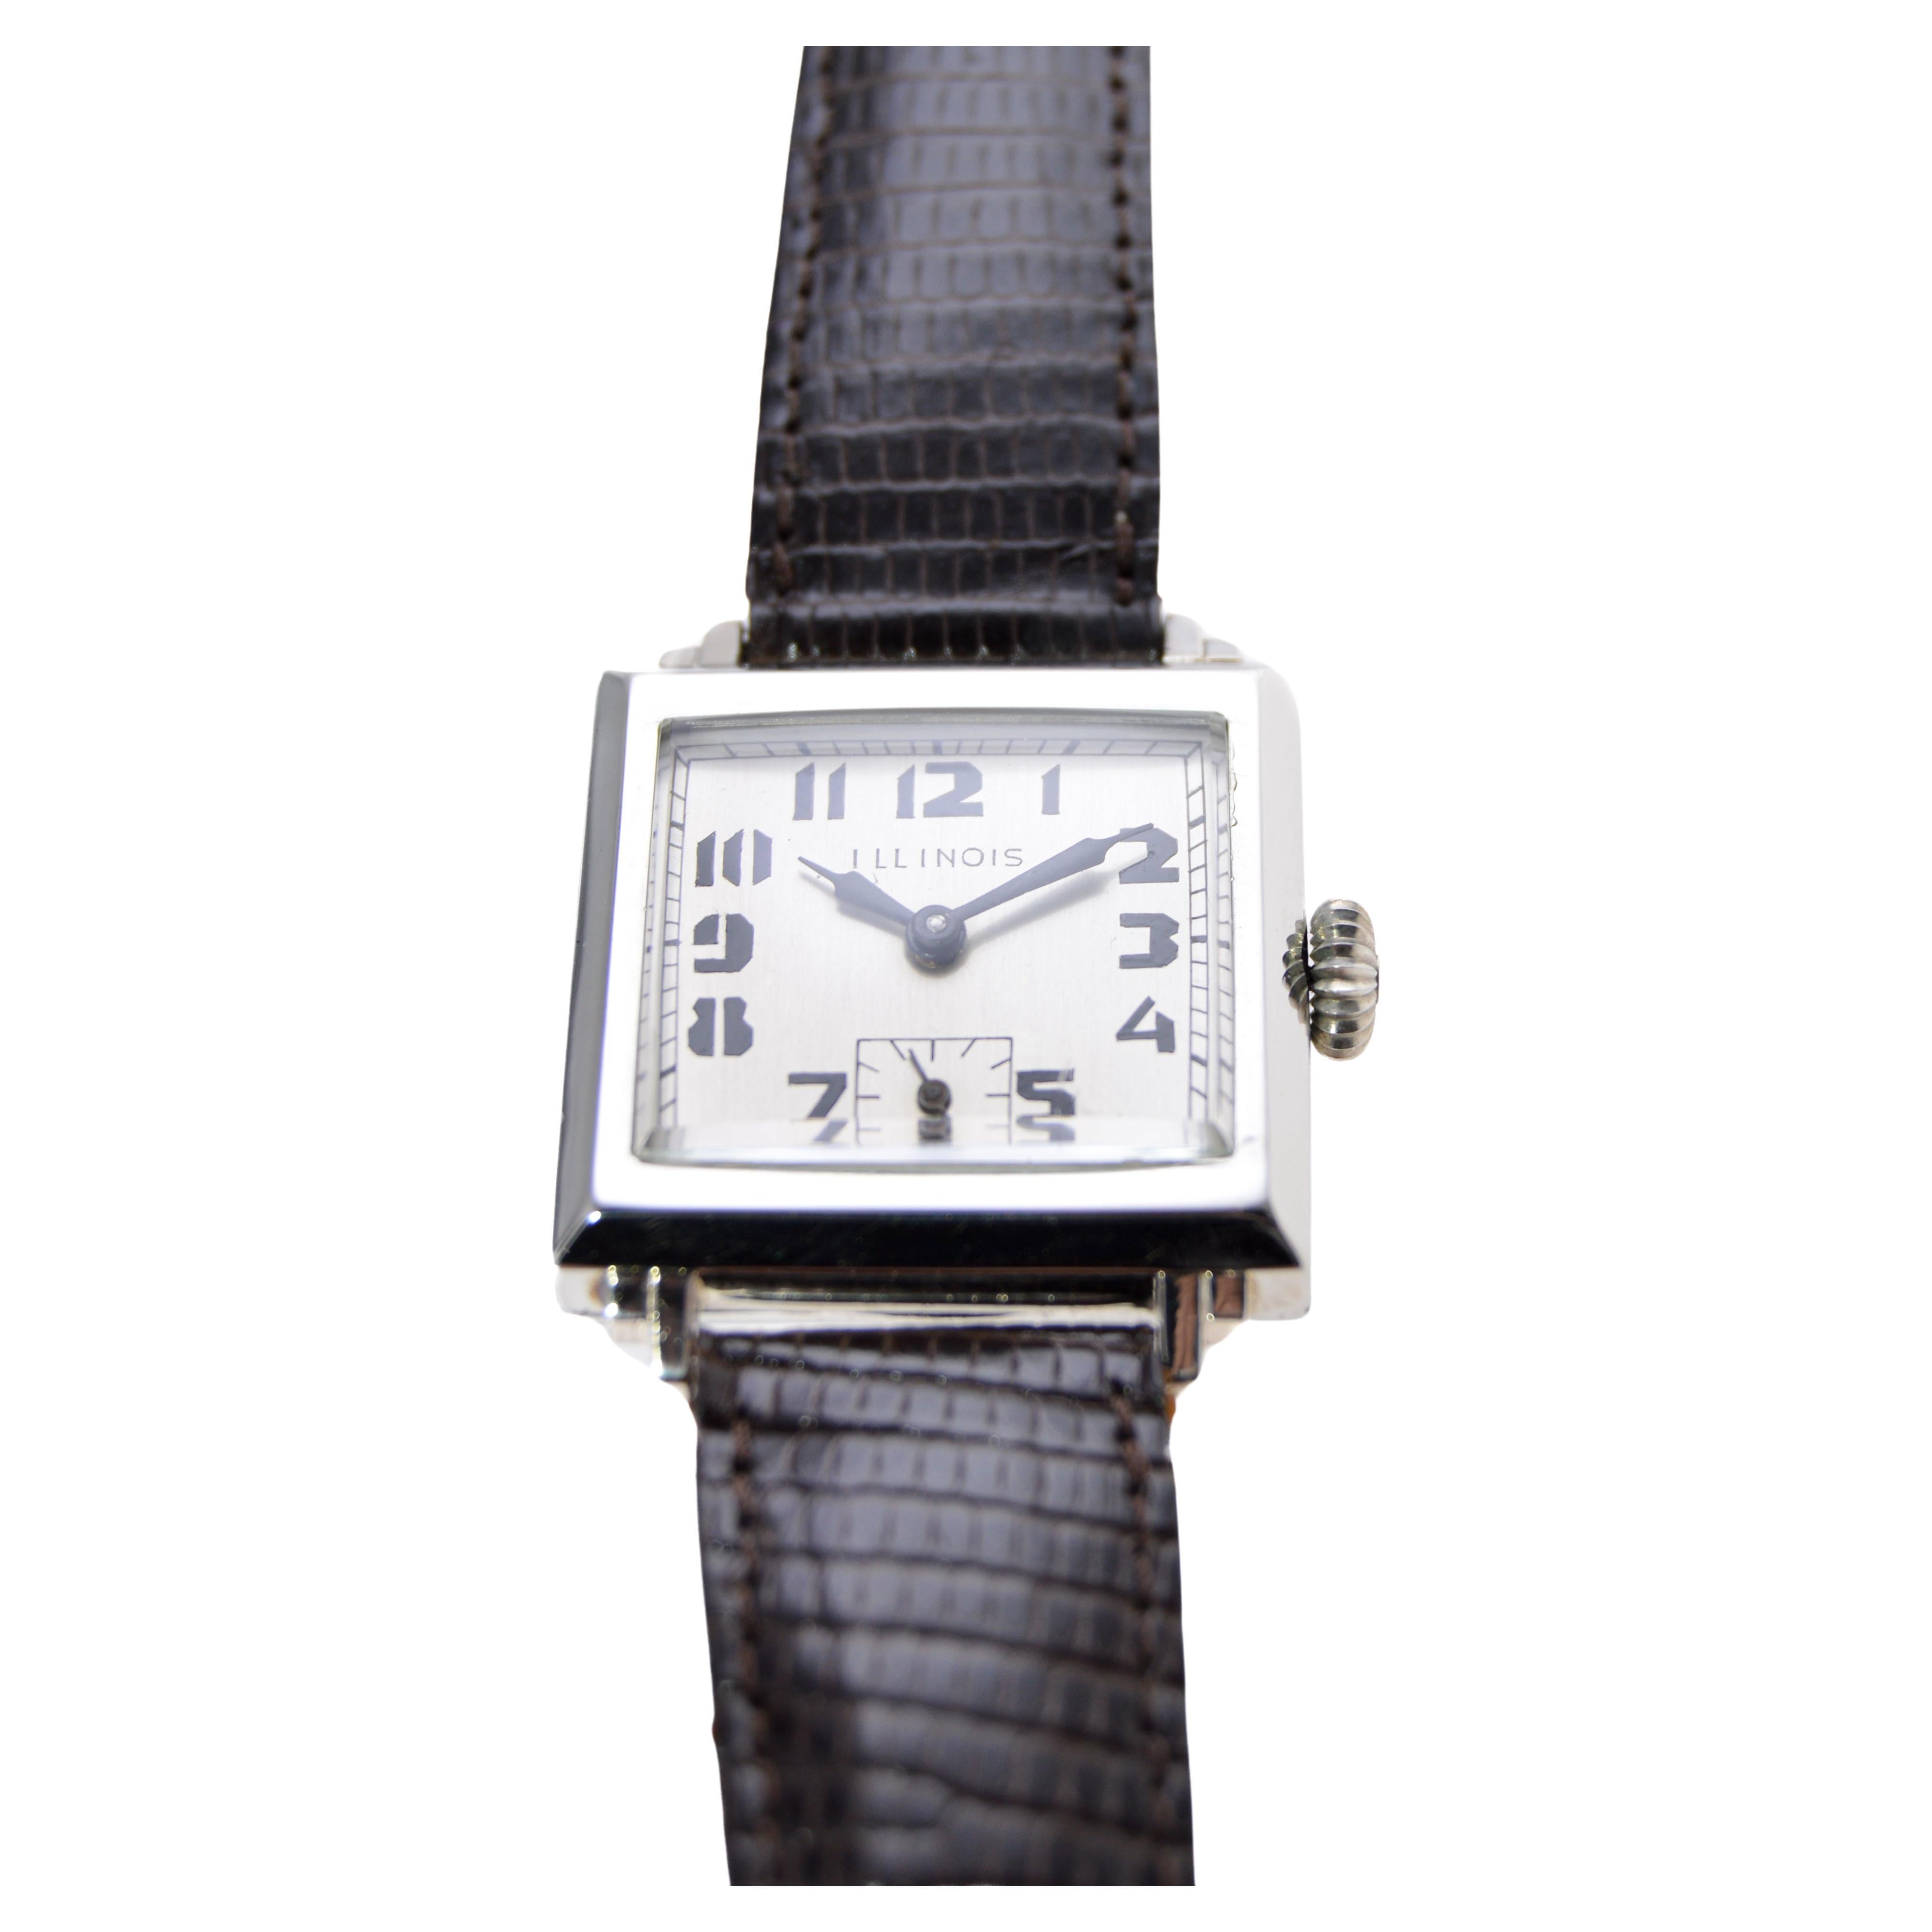 Illinois White Gold Filled Watch Art Deco Wrist Watch 1930's For Sale 3